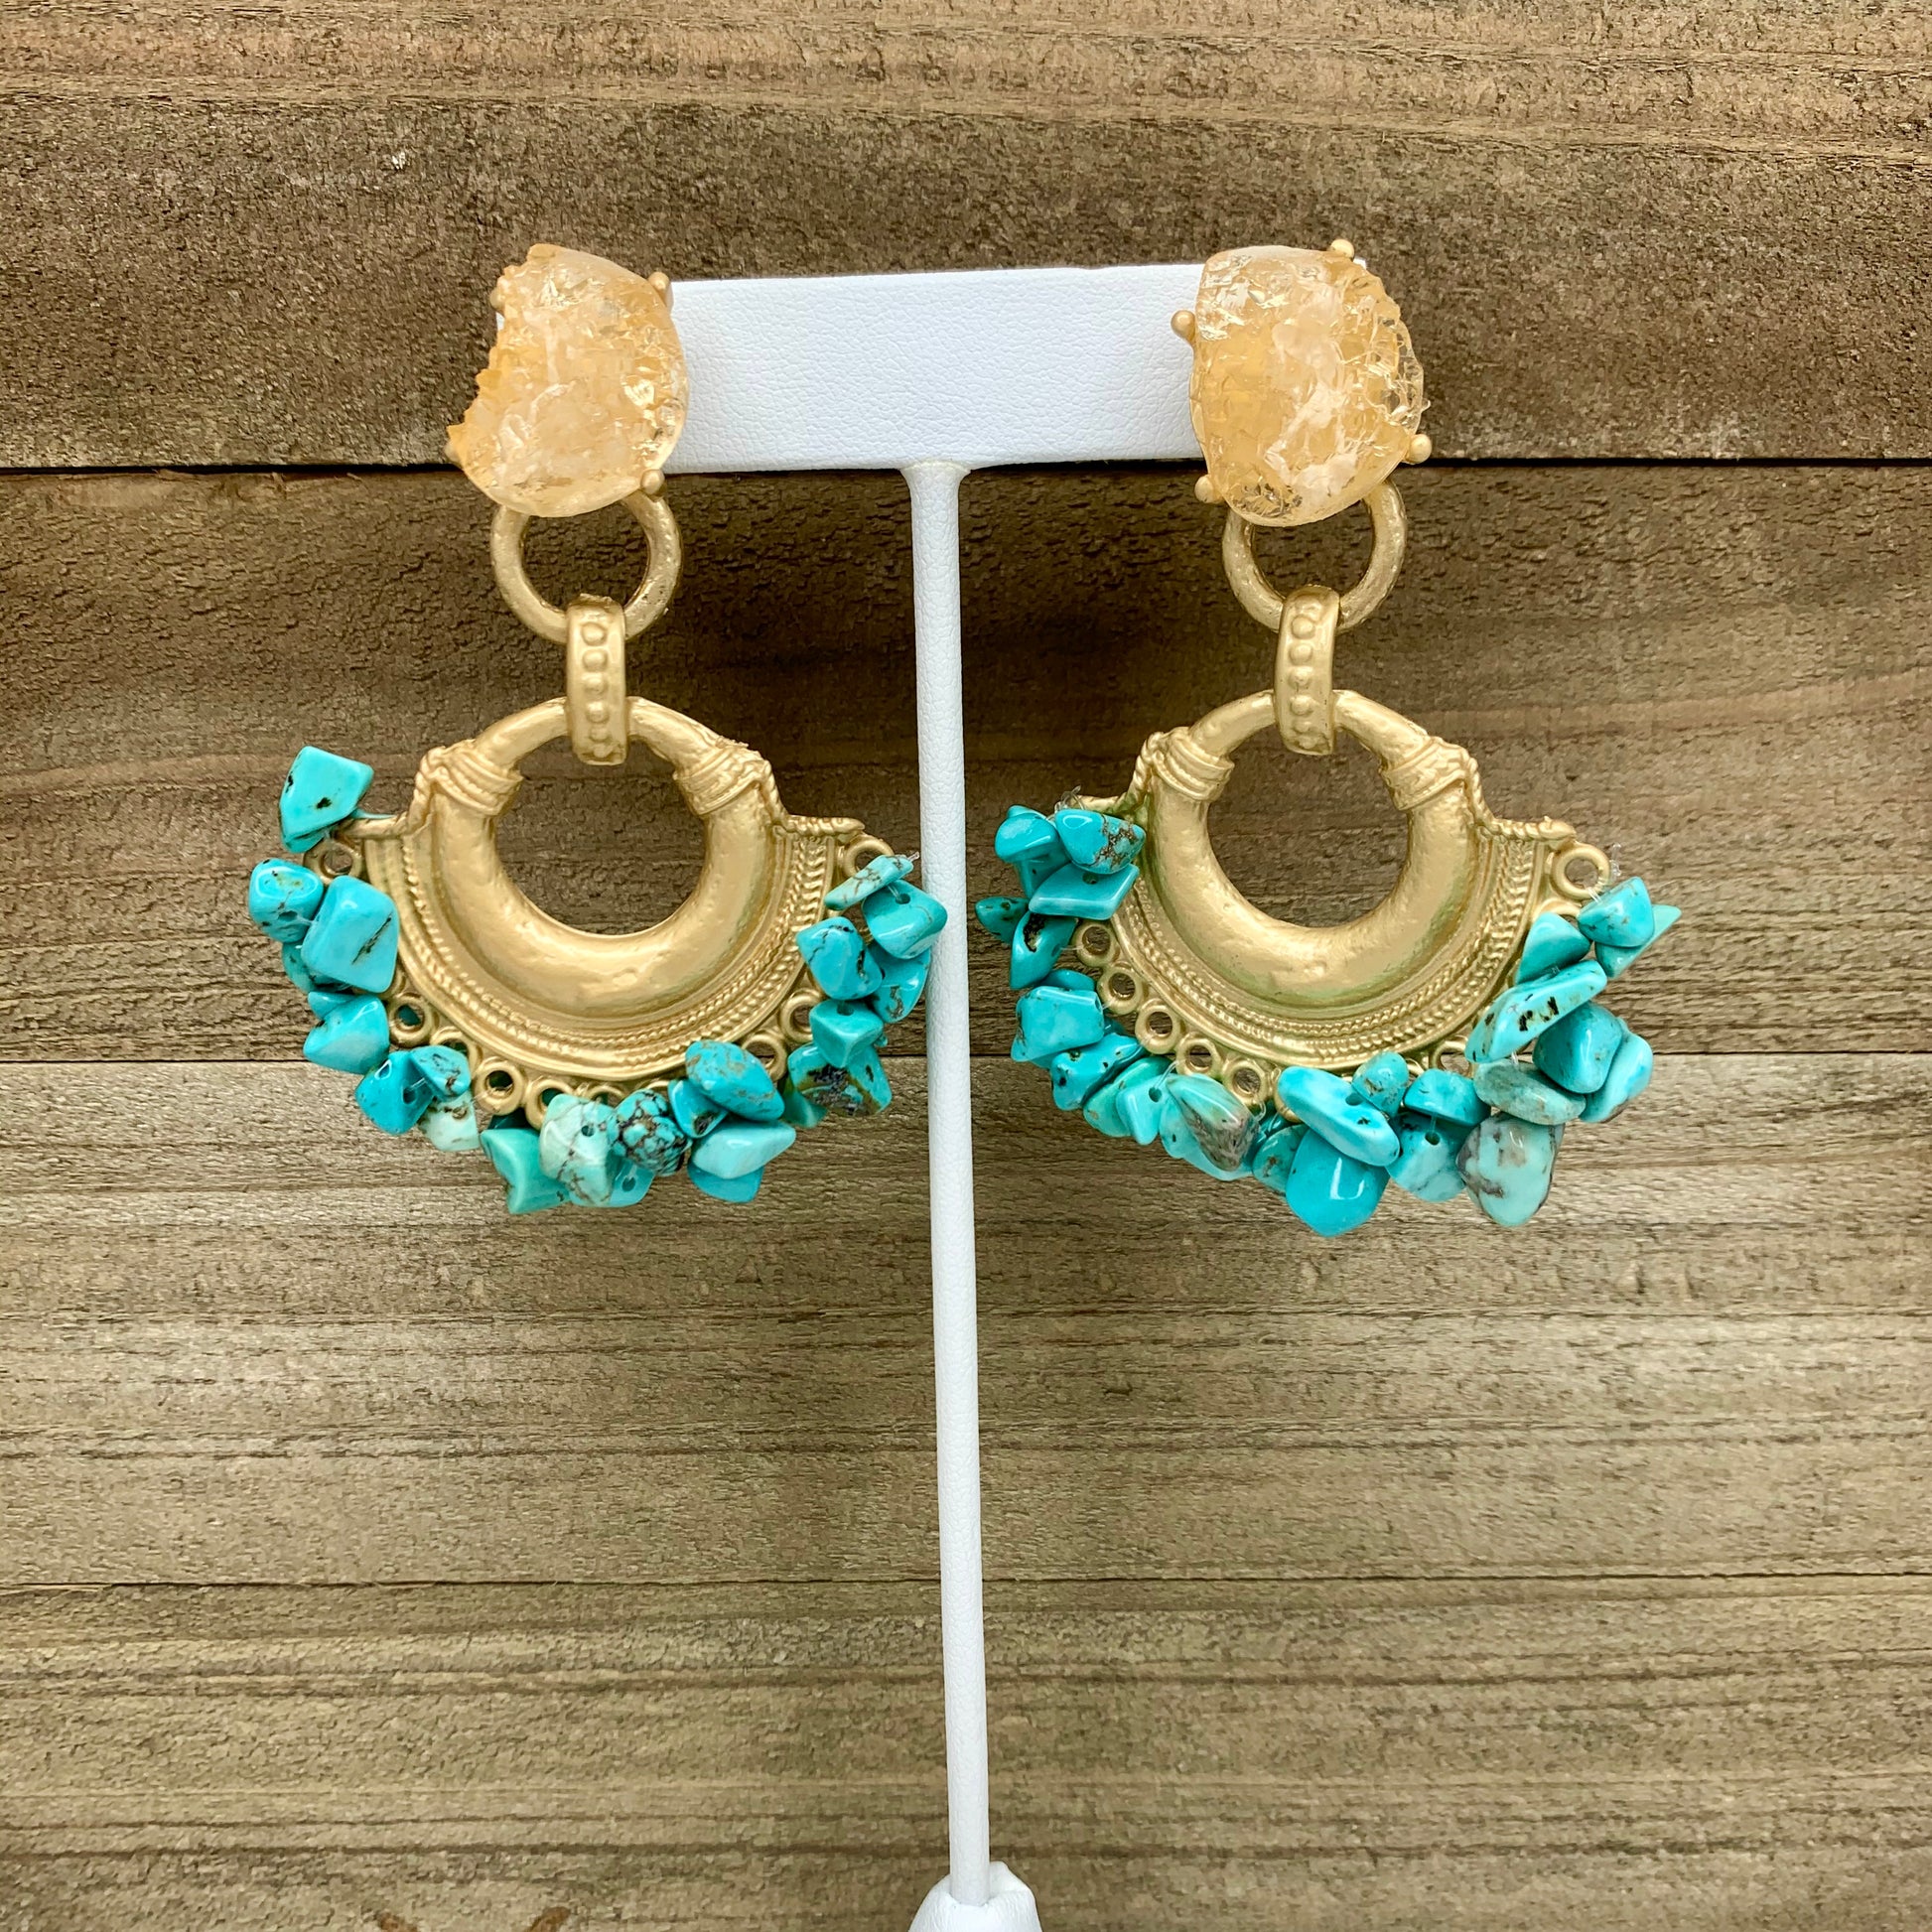 Based Metad Plated Earrings with Turquoise Gemstones Chips